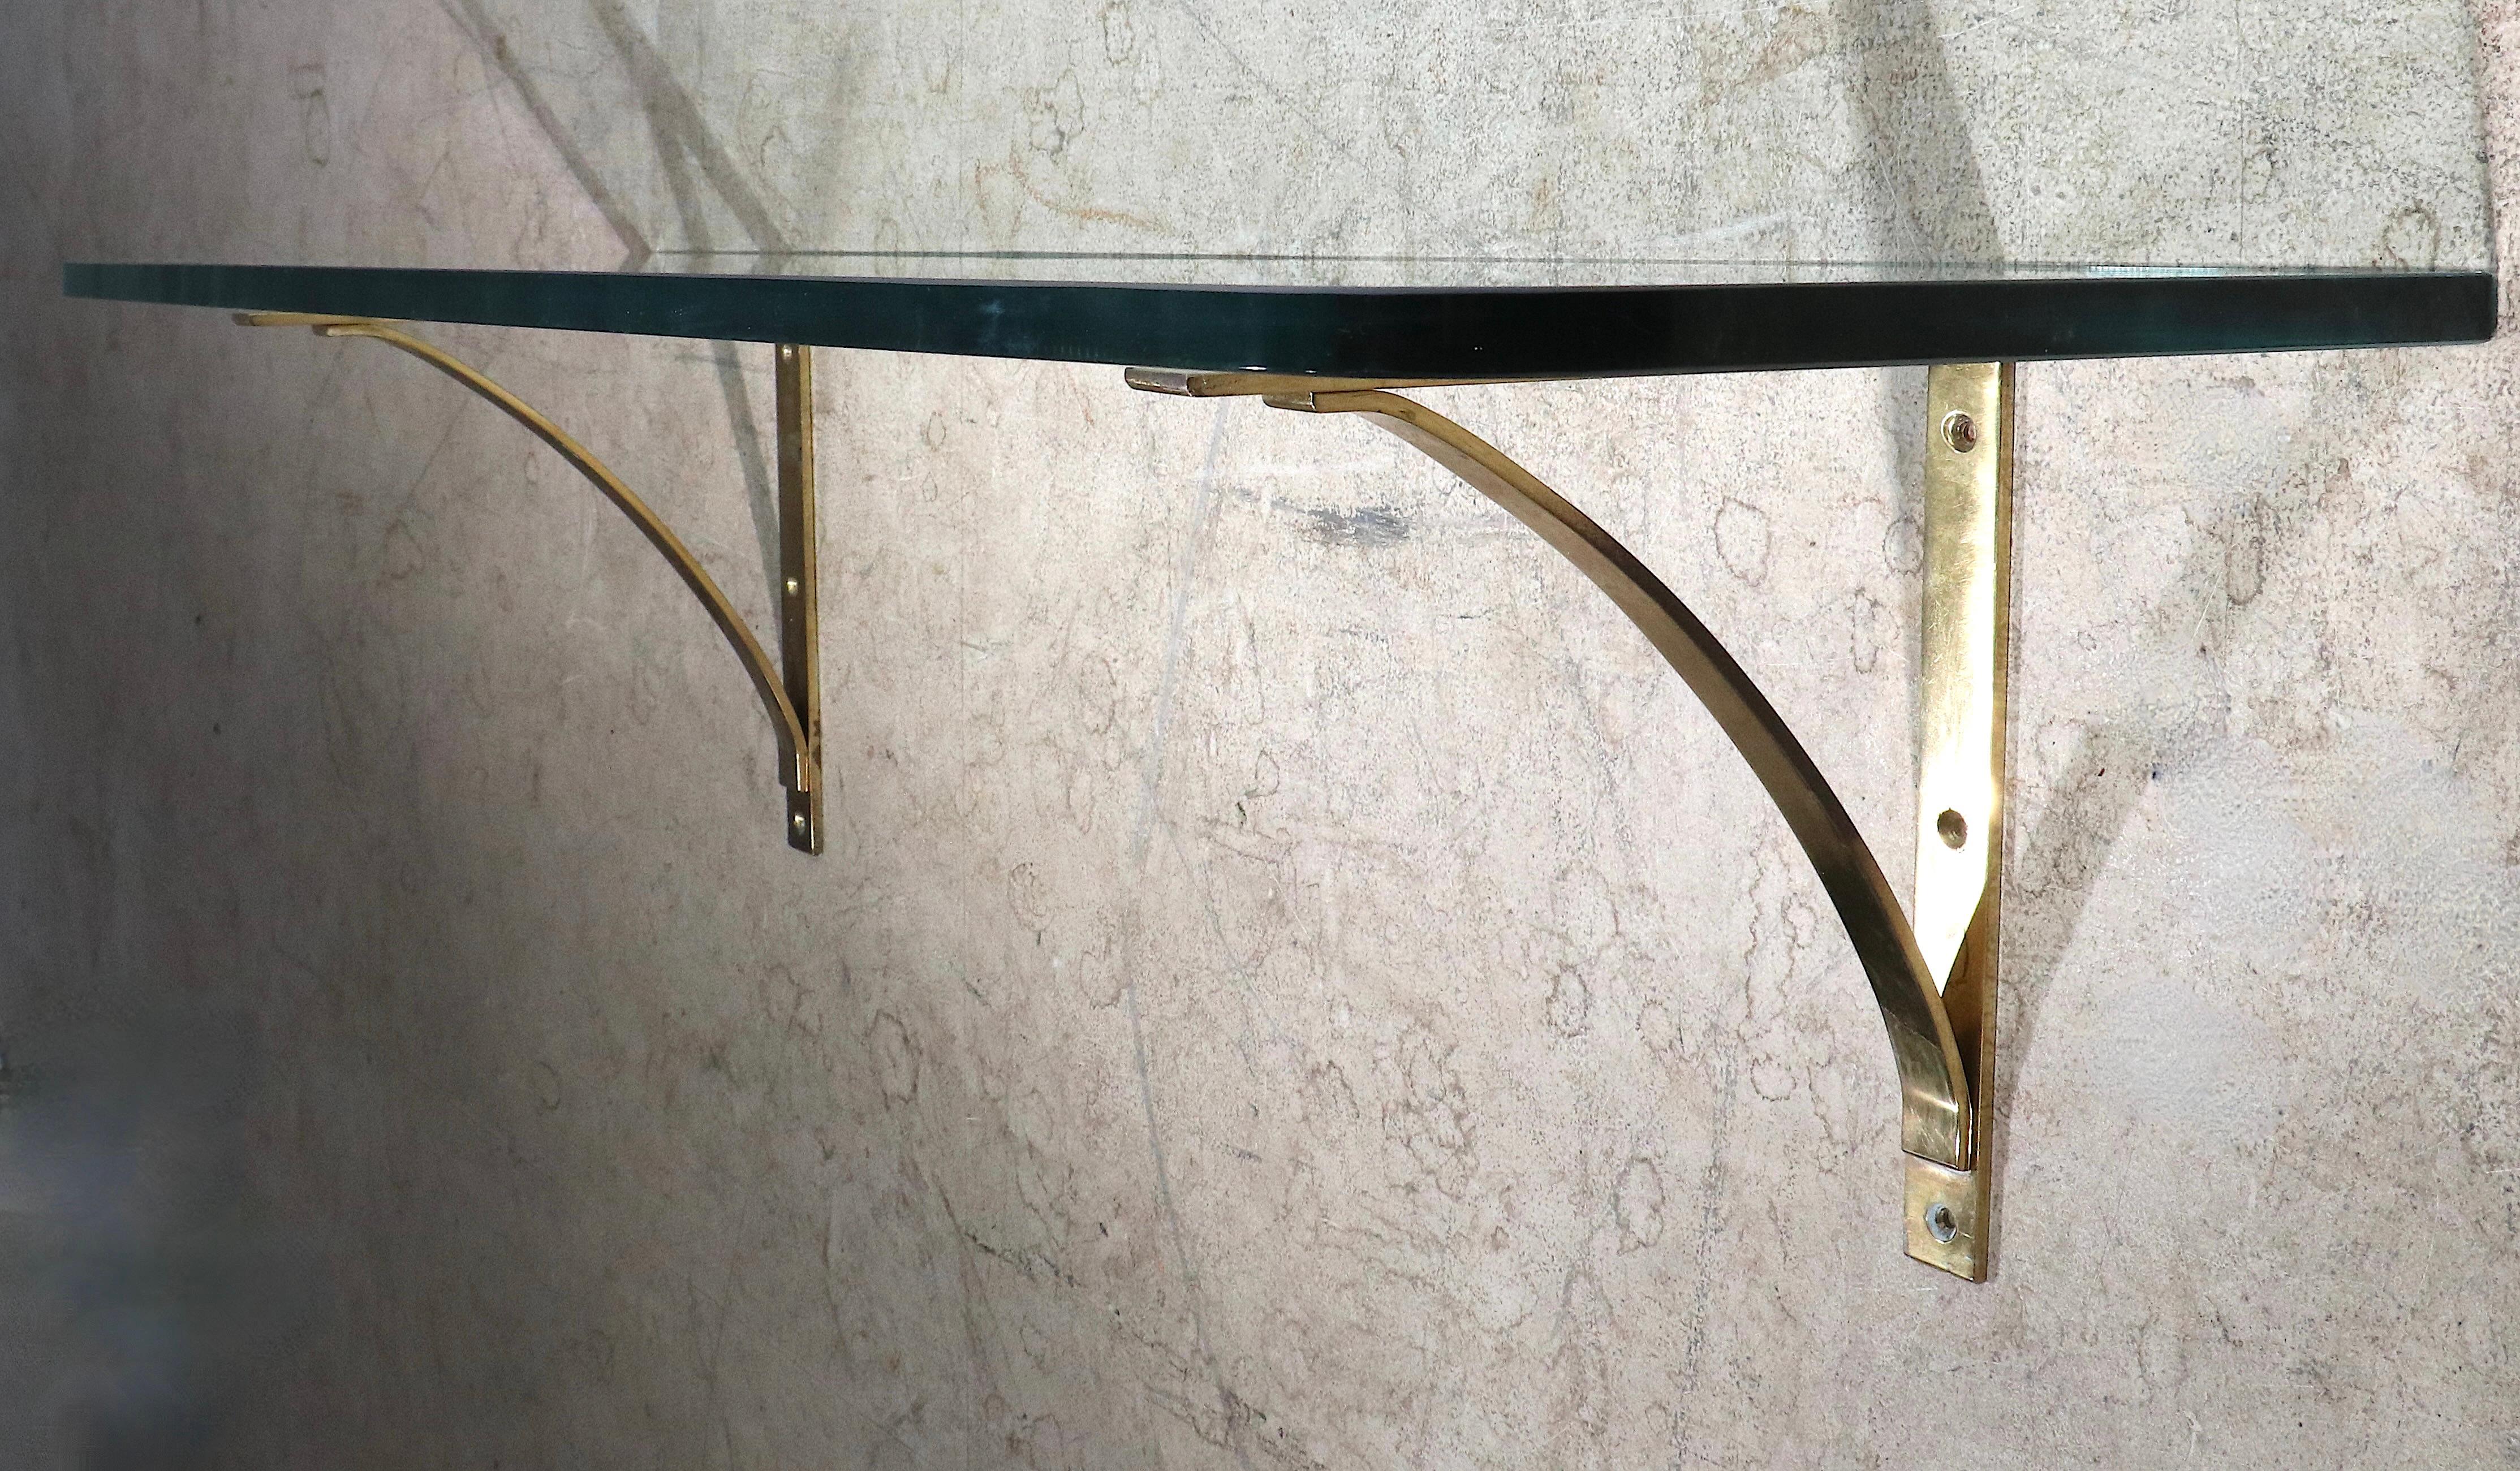 Post Modern Plate Glass and Brass Wall Mount Shelf, C. 1970's For Sale 6